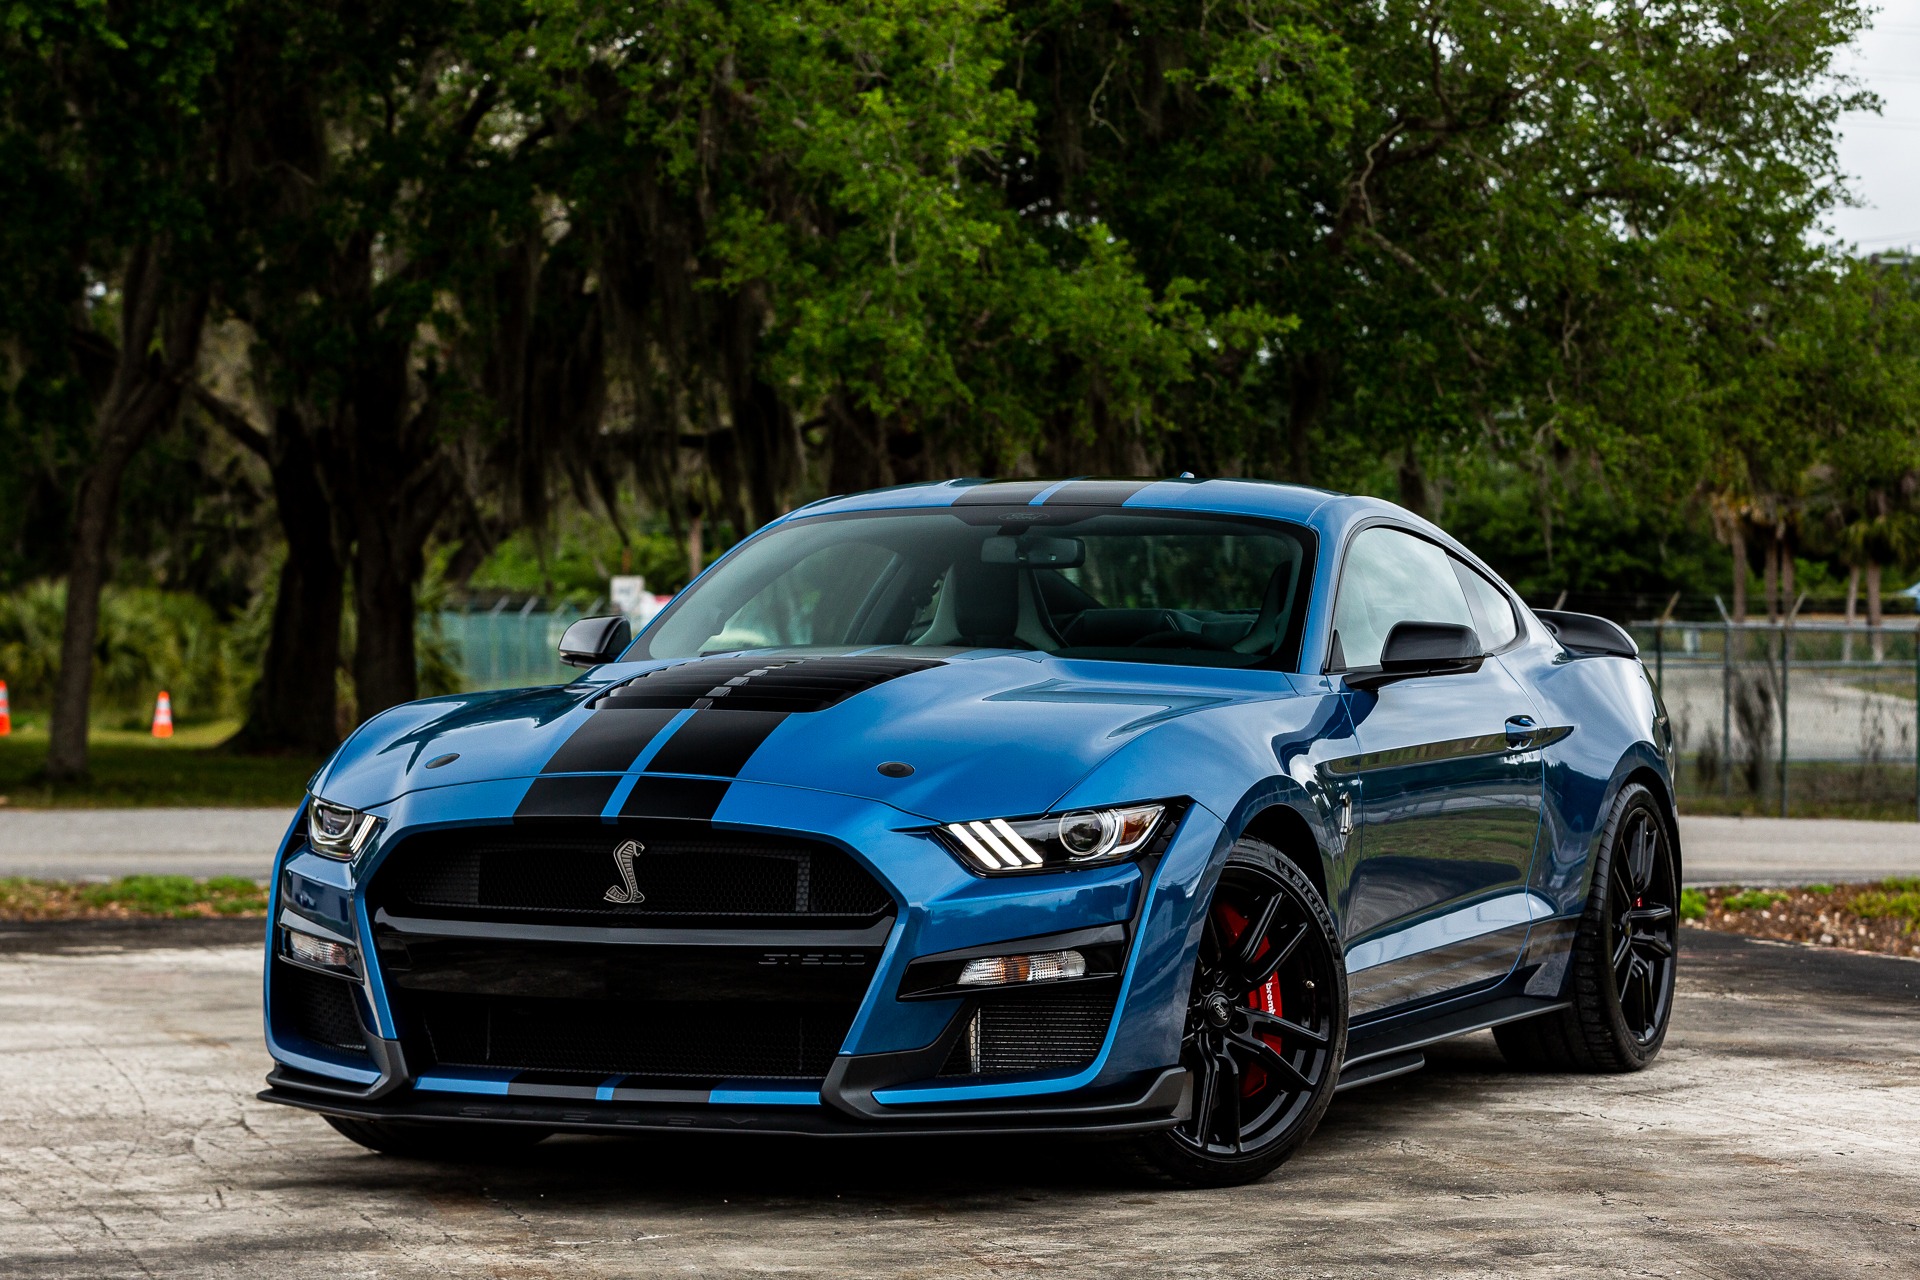 2020 Ford Mustang Shelby Gt500 Matte Black